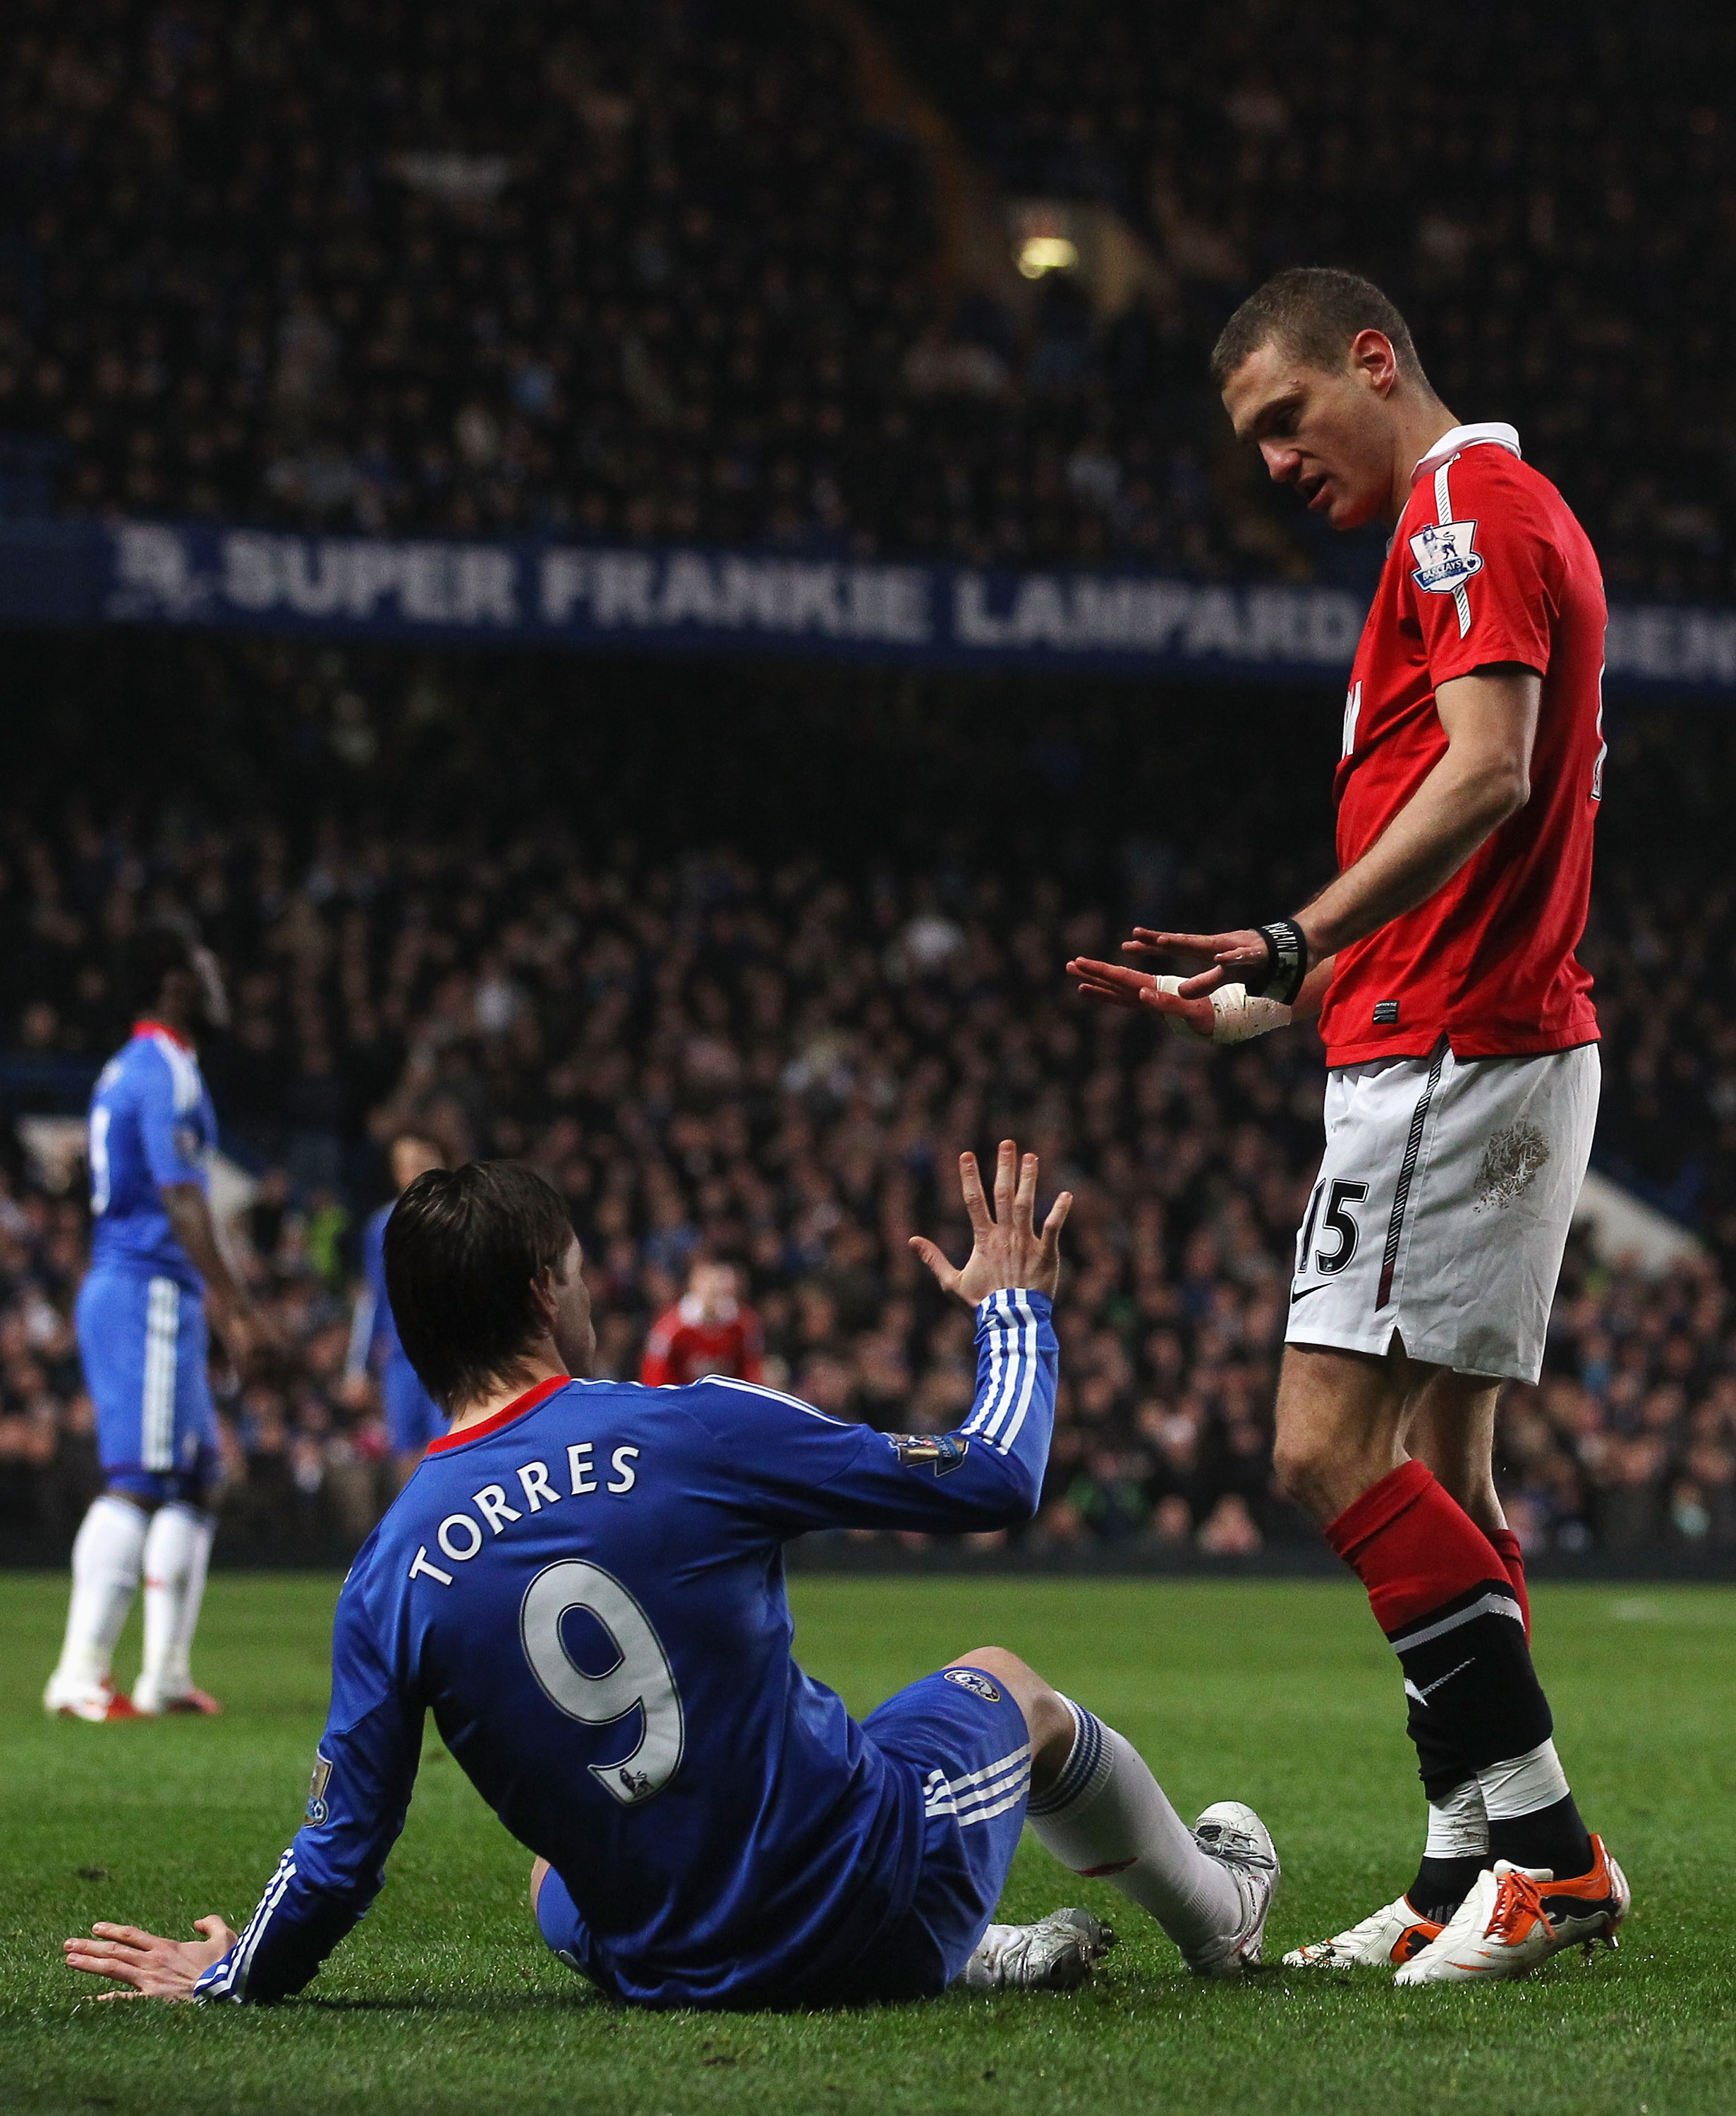 LONDON, ENGLAND - MARCH 01:  Nemanja Vidic of Manchester United exchanges words with Fernando Torres of Chelsea during the Barclays Premier League match between Chelsea and Manchester United at Stamford Bridge on March 1, 2011 in London, England.  (Photo